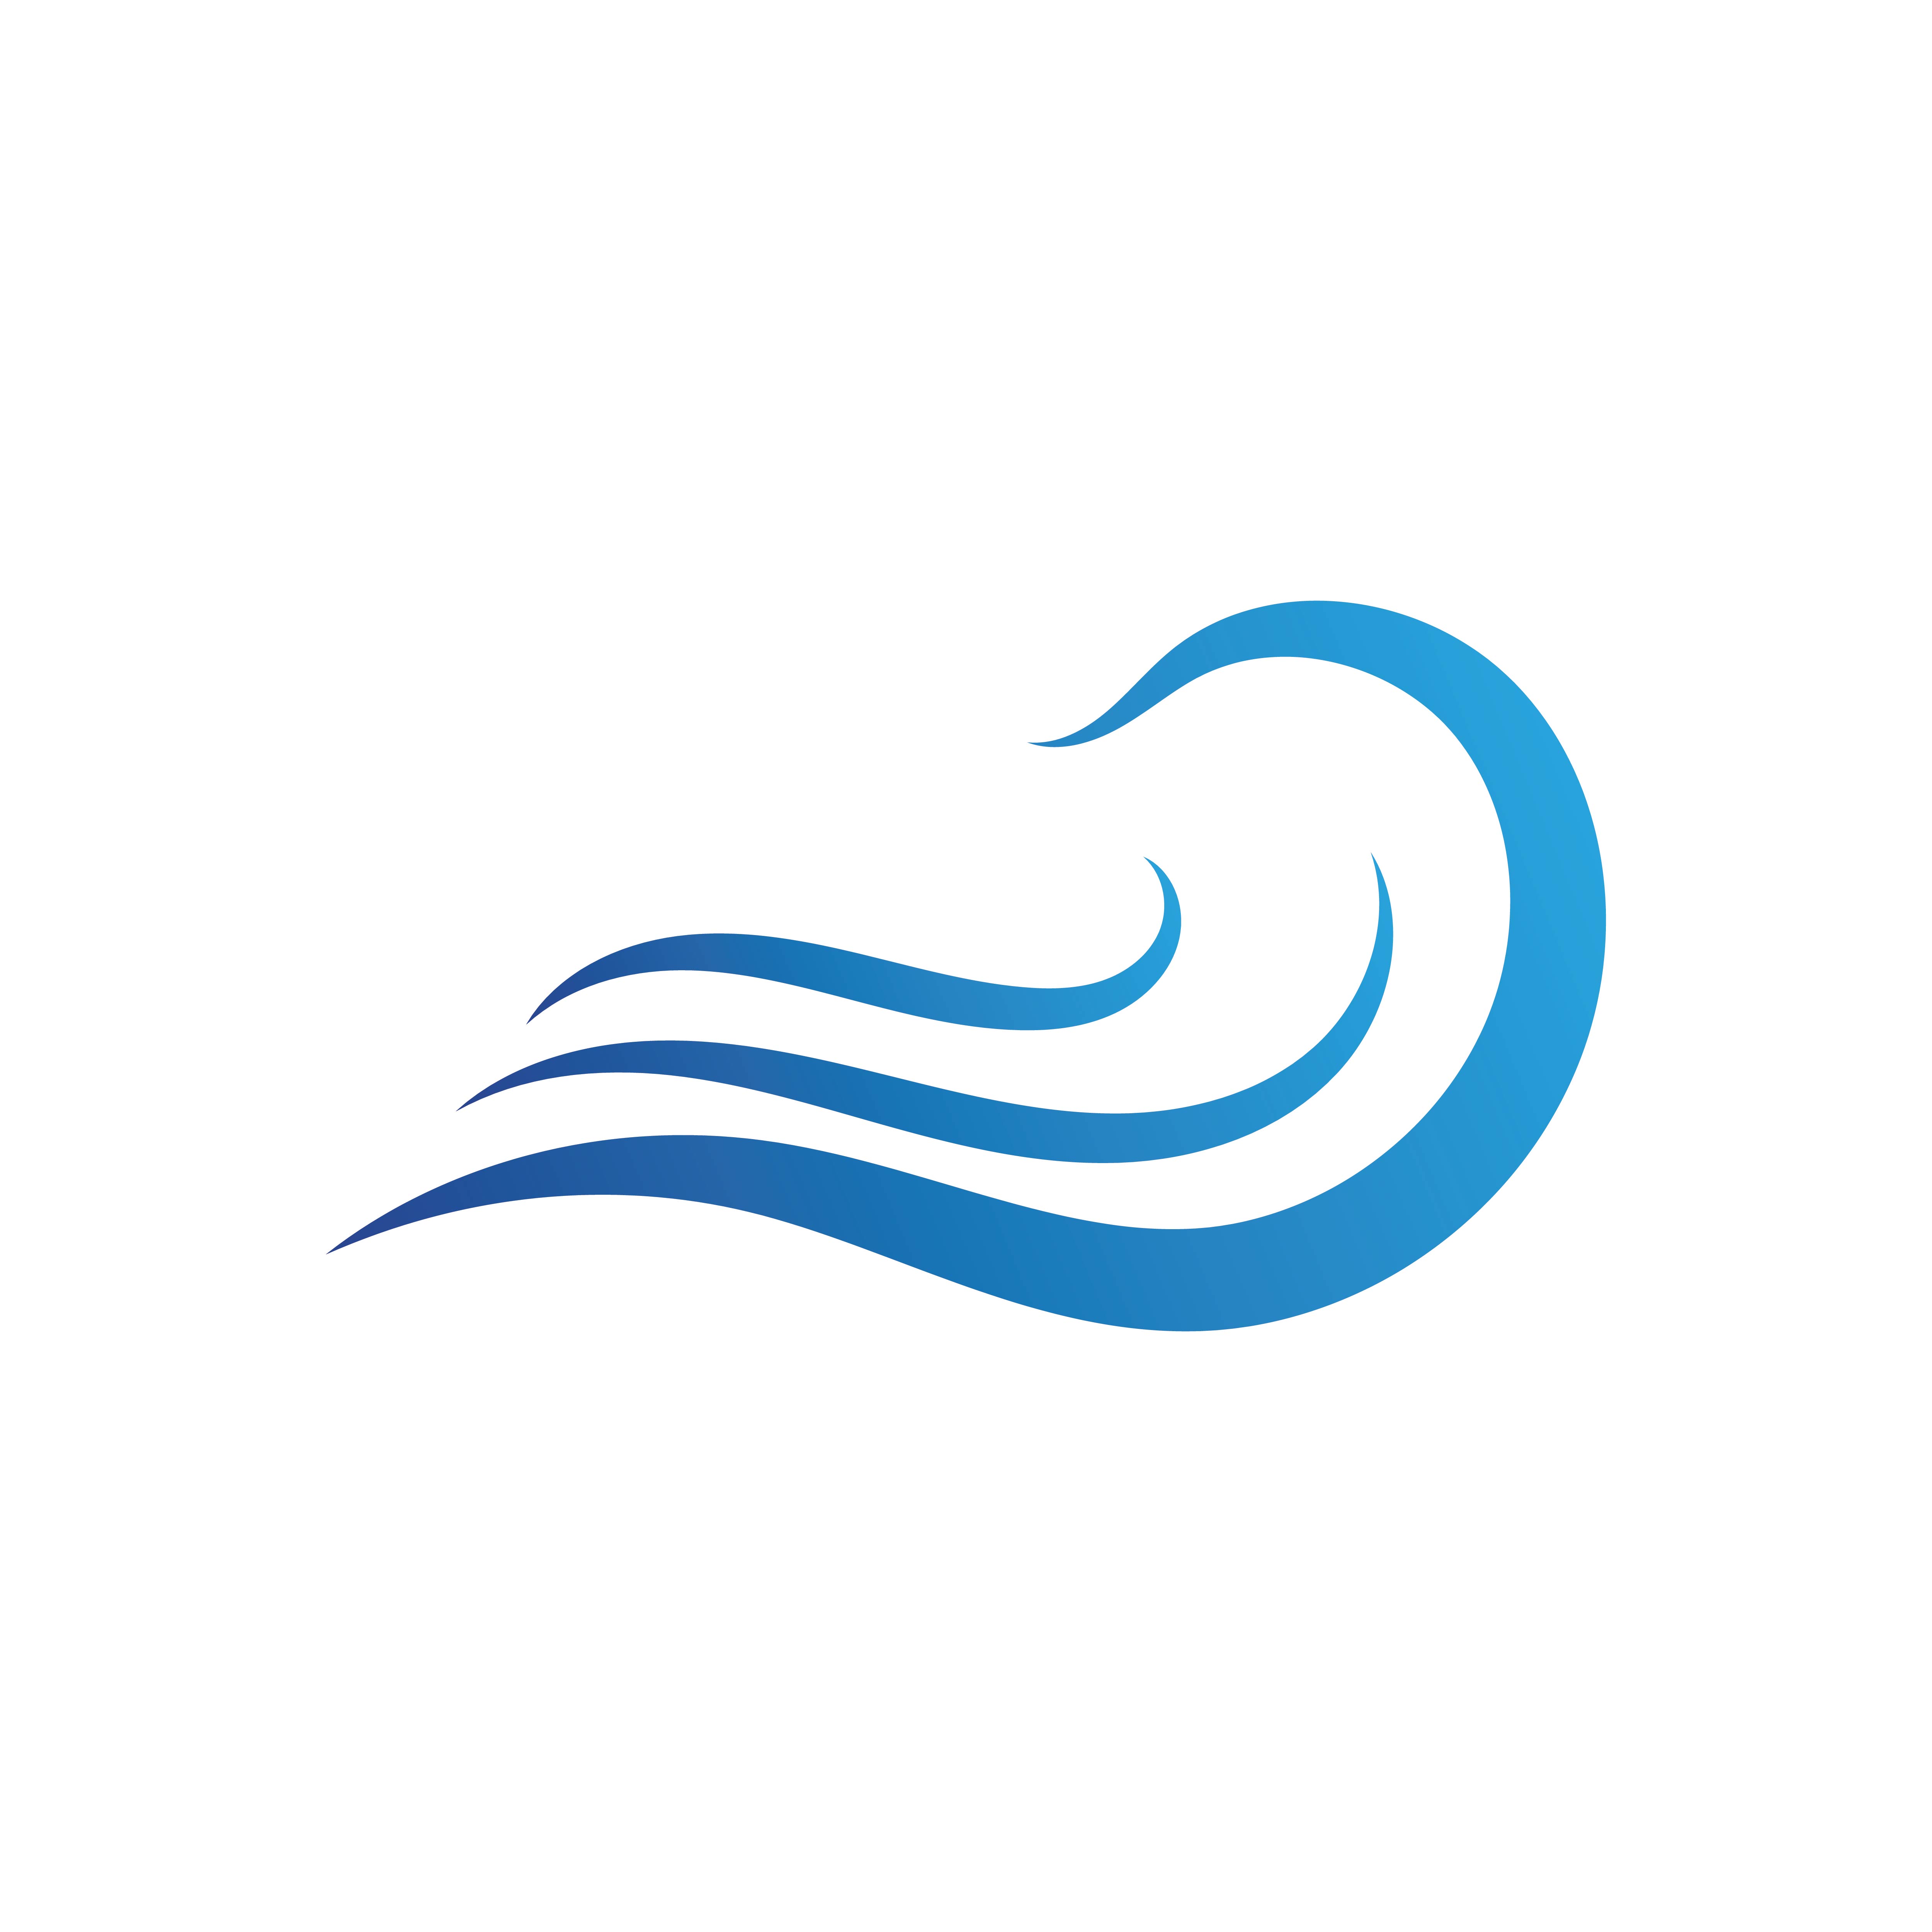 Water wave beach logo symbol cover image.